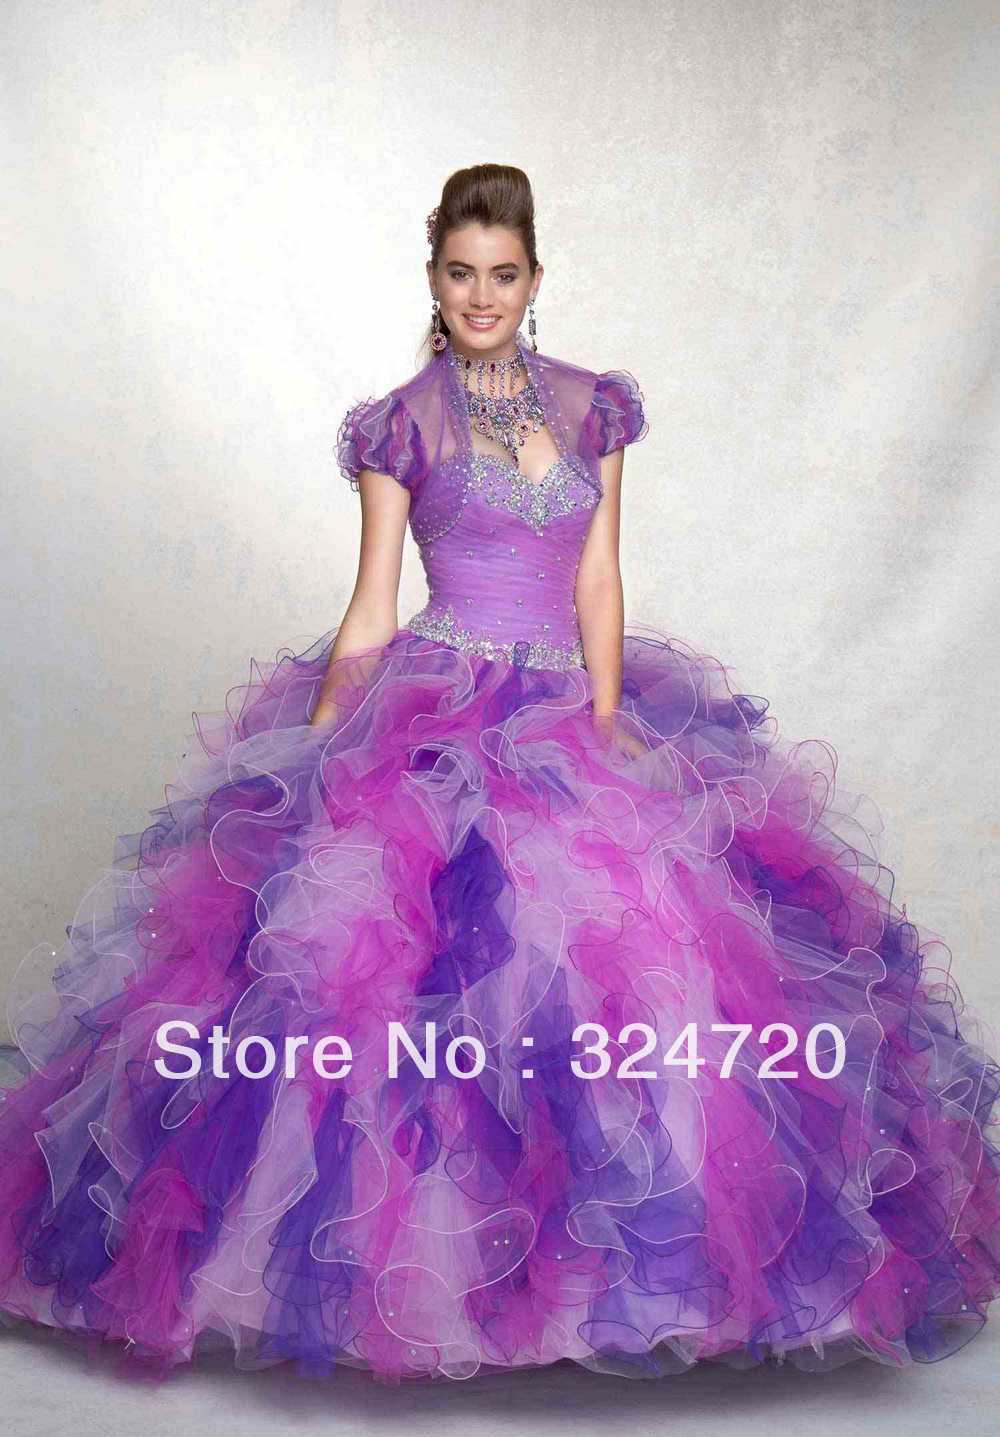 Romantic beading 2013 purple multi colored puffy quinceanera dress Style 88047 custom size custom color wholesale free shipping